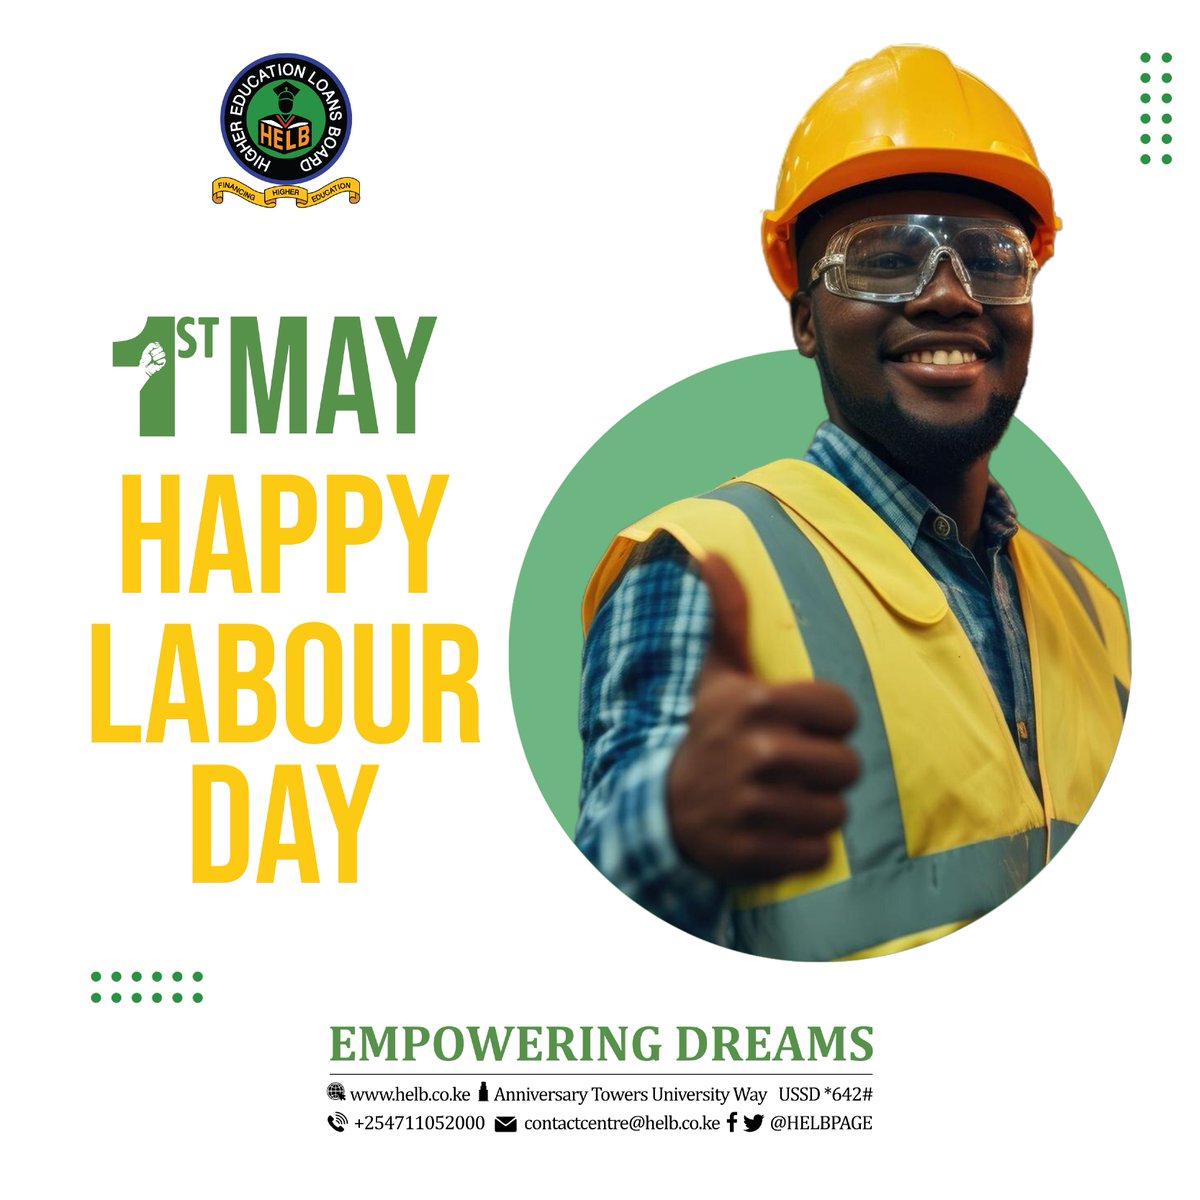 On this day, we pause to honour the resilience and dedication of every worker, especially, those who are committed to consistent, timely #HELBLoan repayment. You help us Empower more dreams.  #SocialJustice #DecentWorkforall